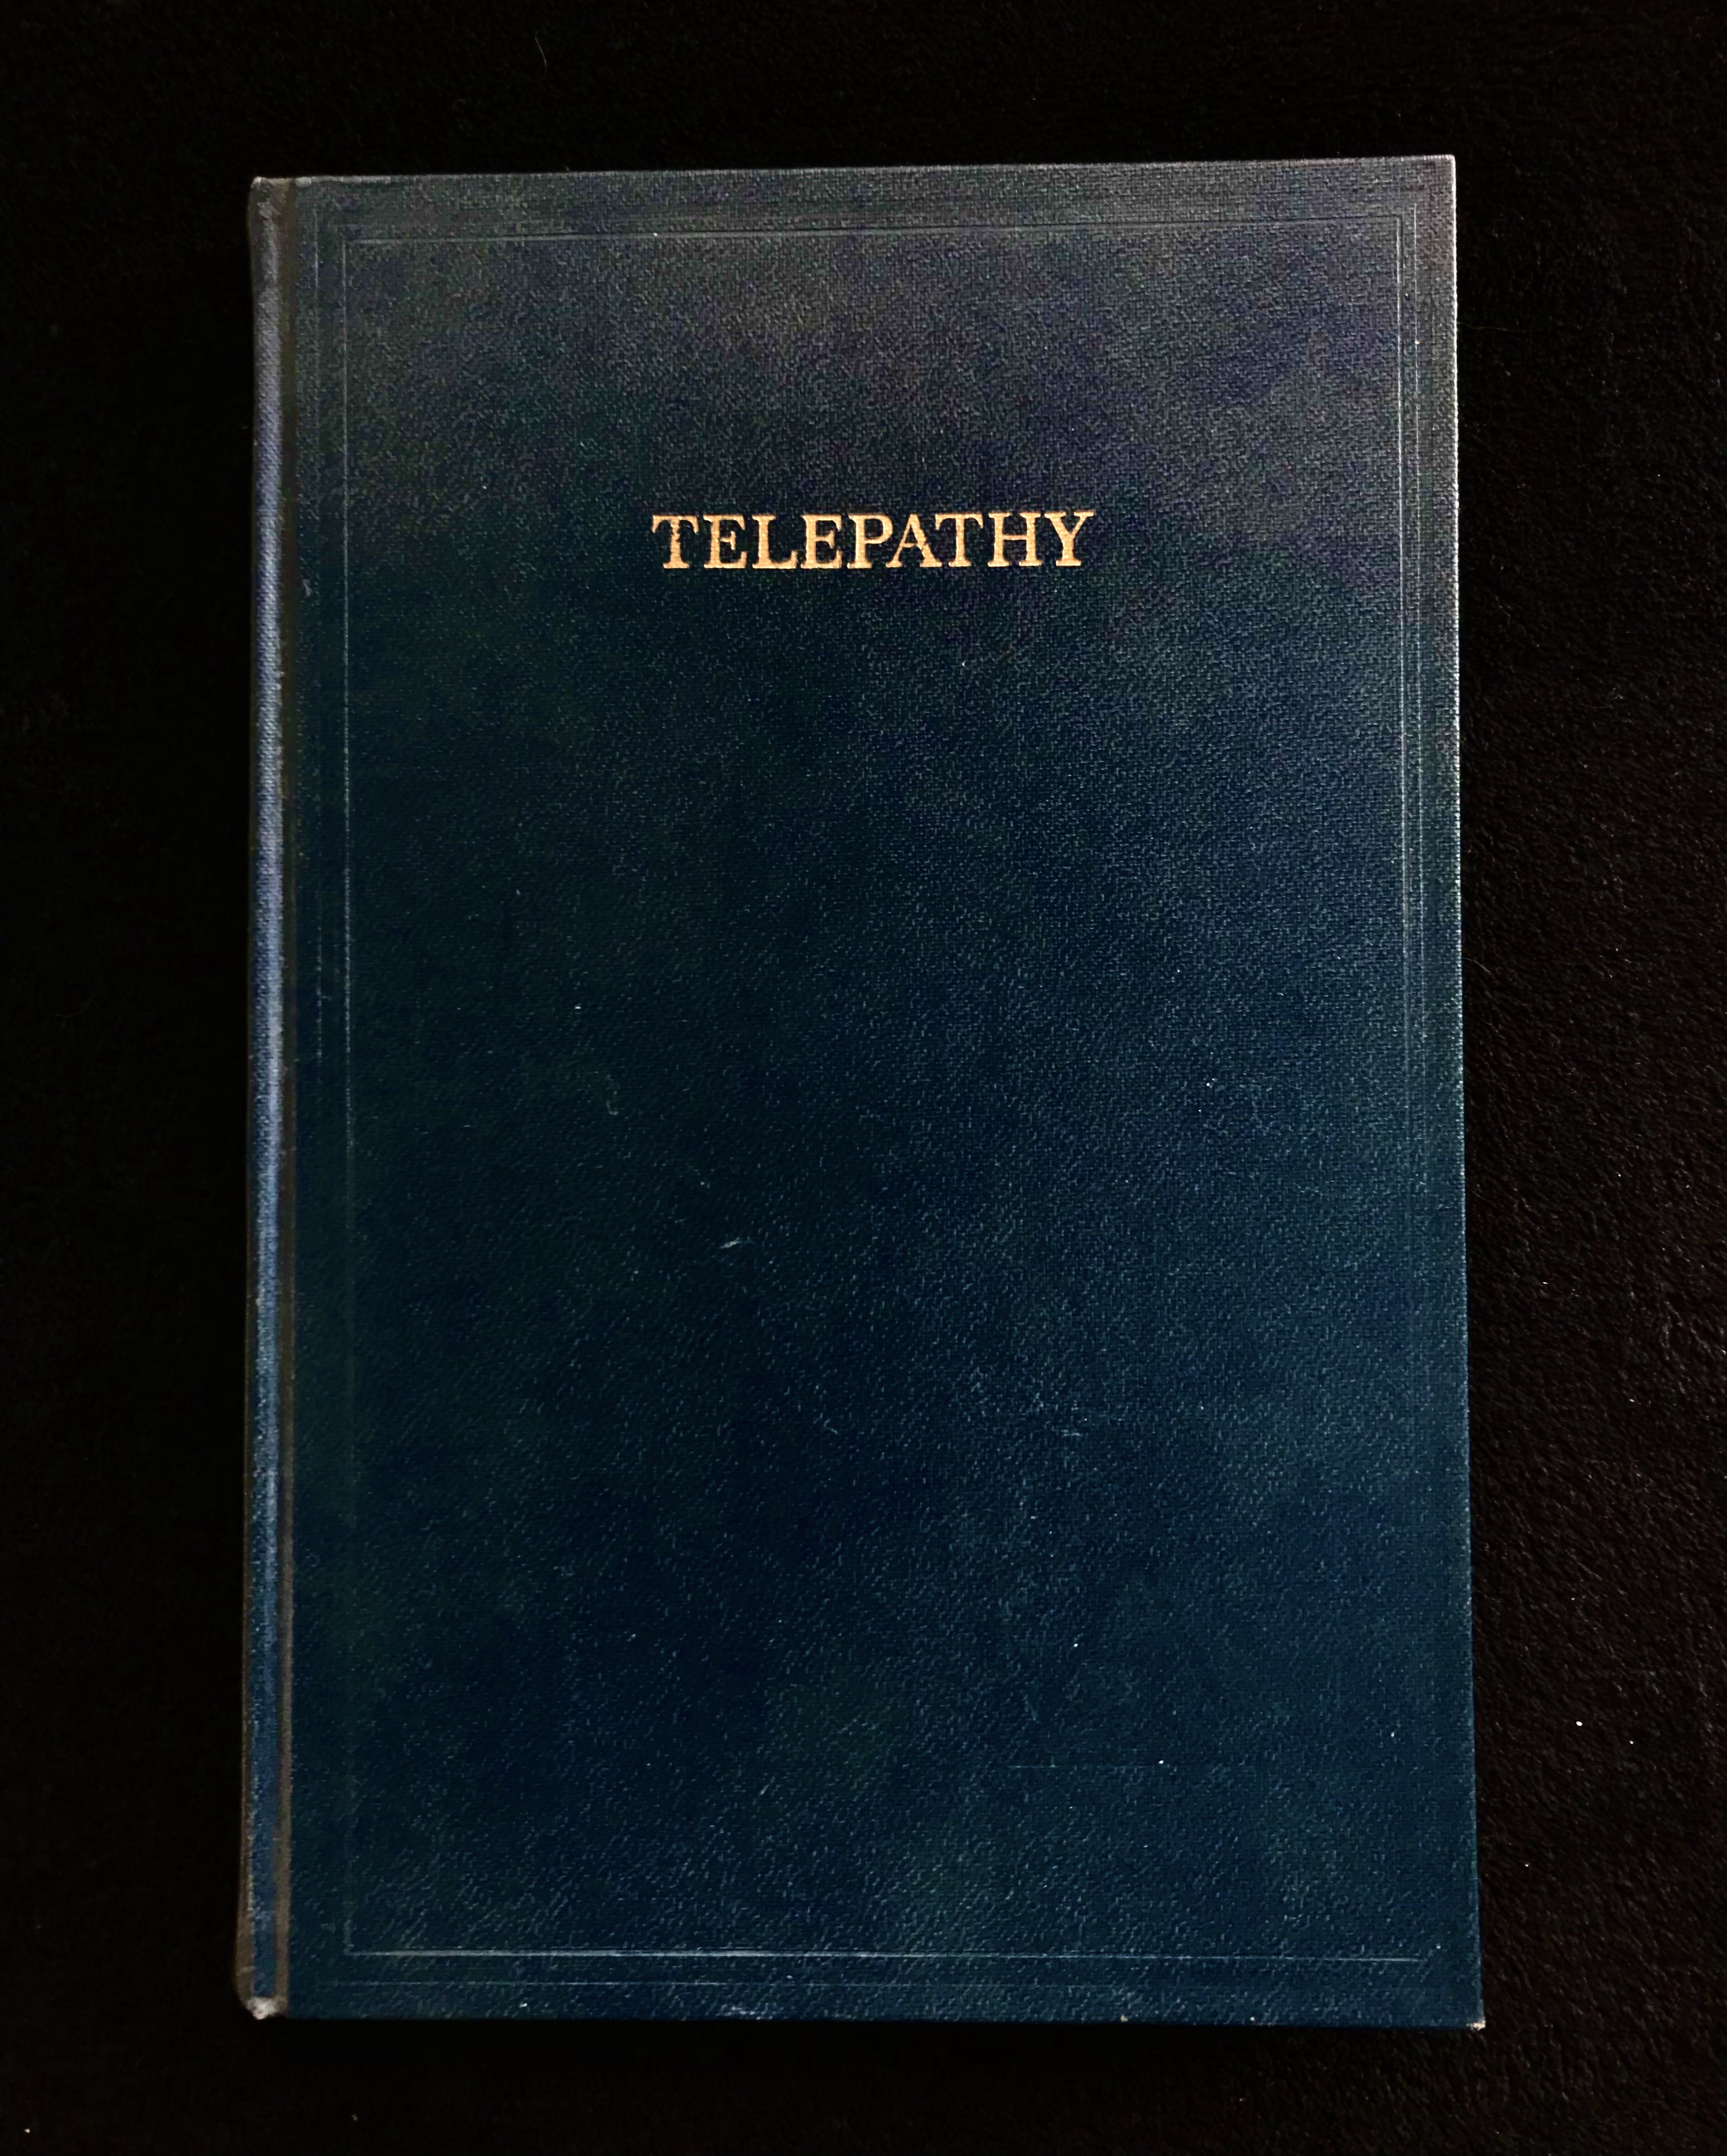 Telepathy & The Etheric Vehicle by Alice A. Bailey